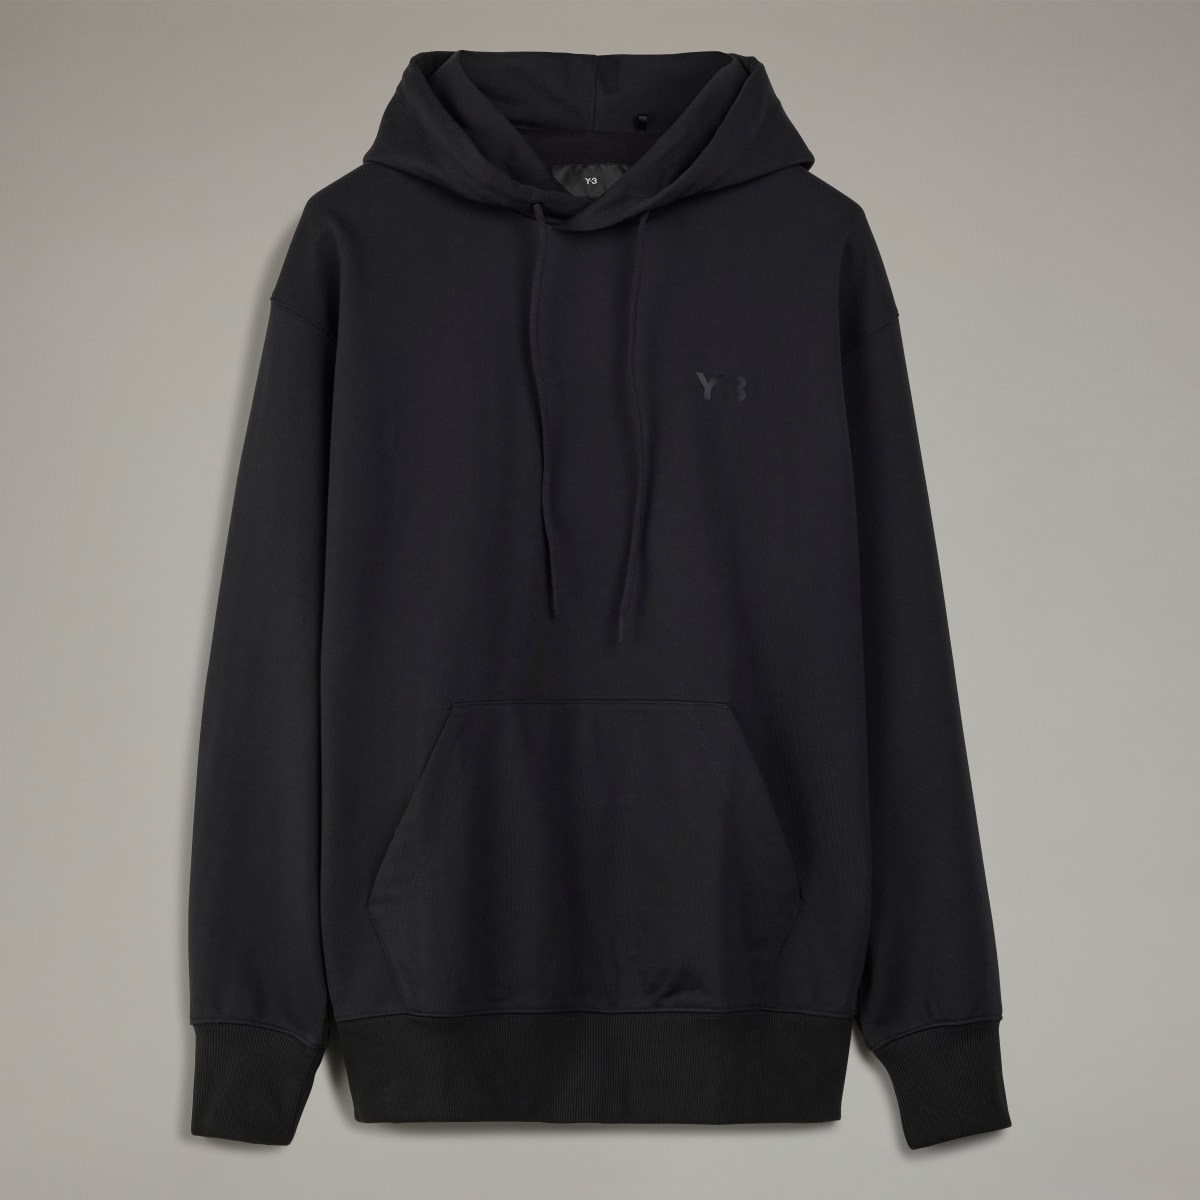 Adidas Y-3 French Terry Hoodie. 4